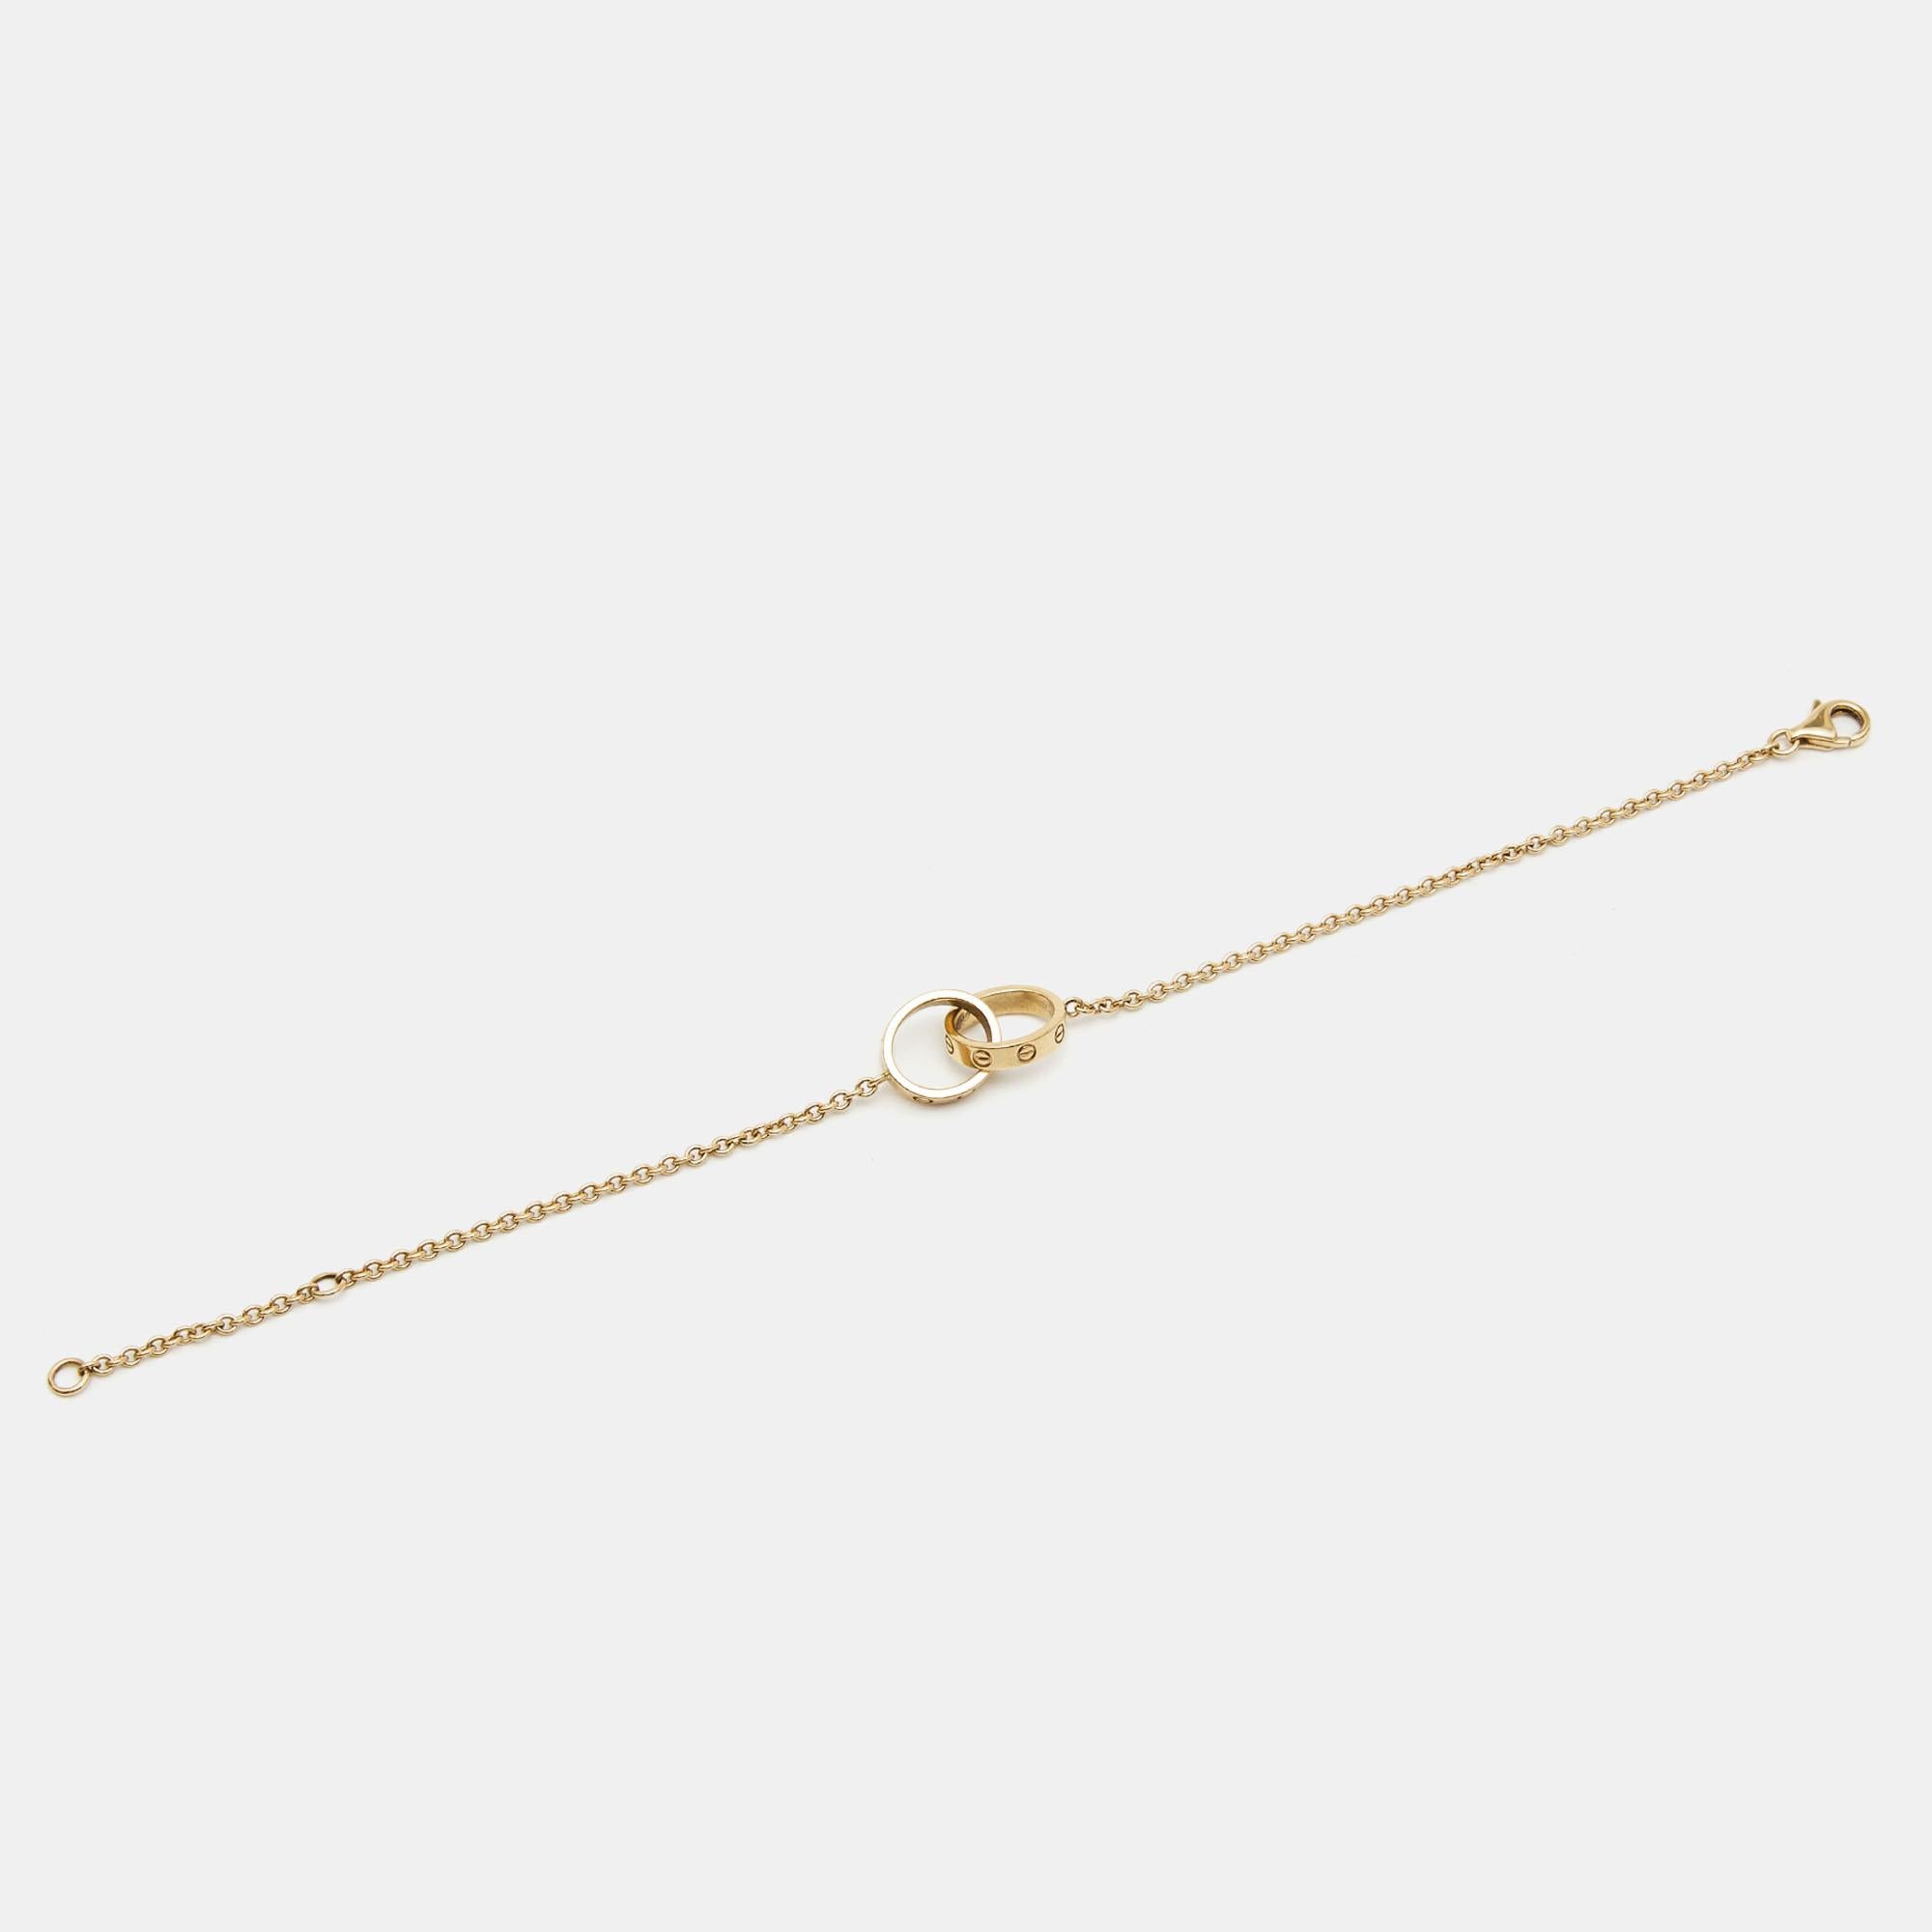 Celebrate timeless love with this bracelet from Cartier's Love collection. Made from 18k yellow gold, it has a chain that holds two magnificent rings interlocked with one another. On both, one can see the iconic screw motifs — a signature of the